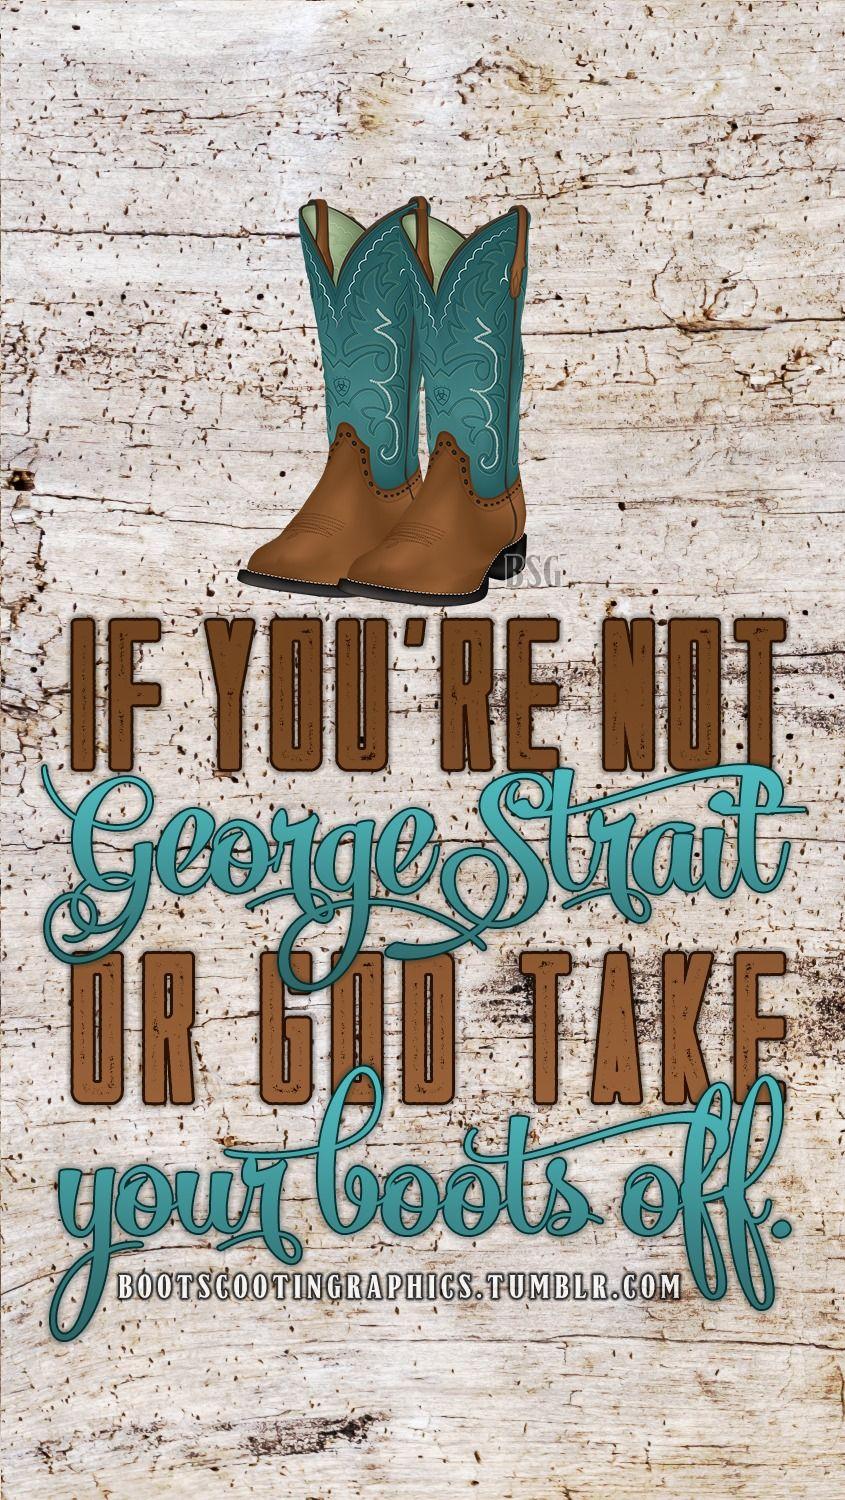 BSG's 13 Days of George Strait. Wallpaper for iPhone 6